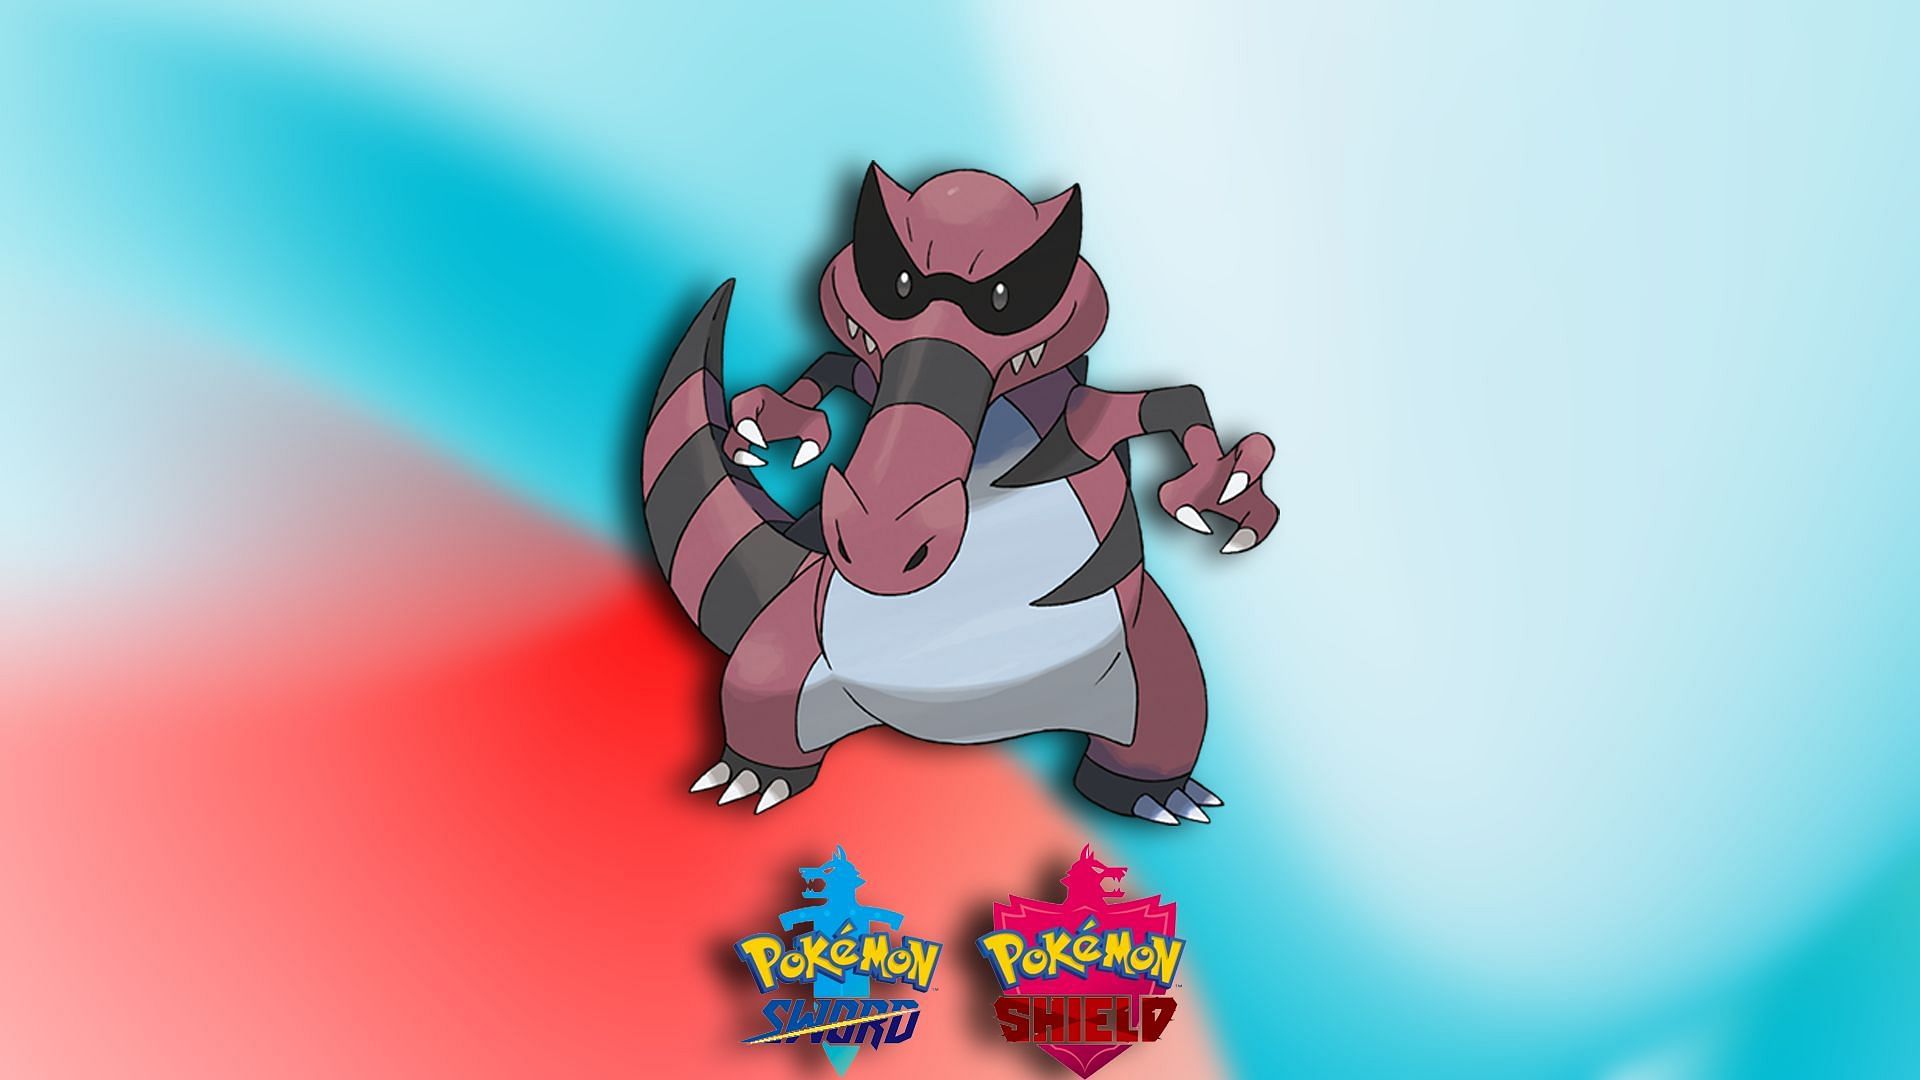 Krookodile - the best team for Pokemon Sword and Shield (Image via TPC)